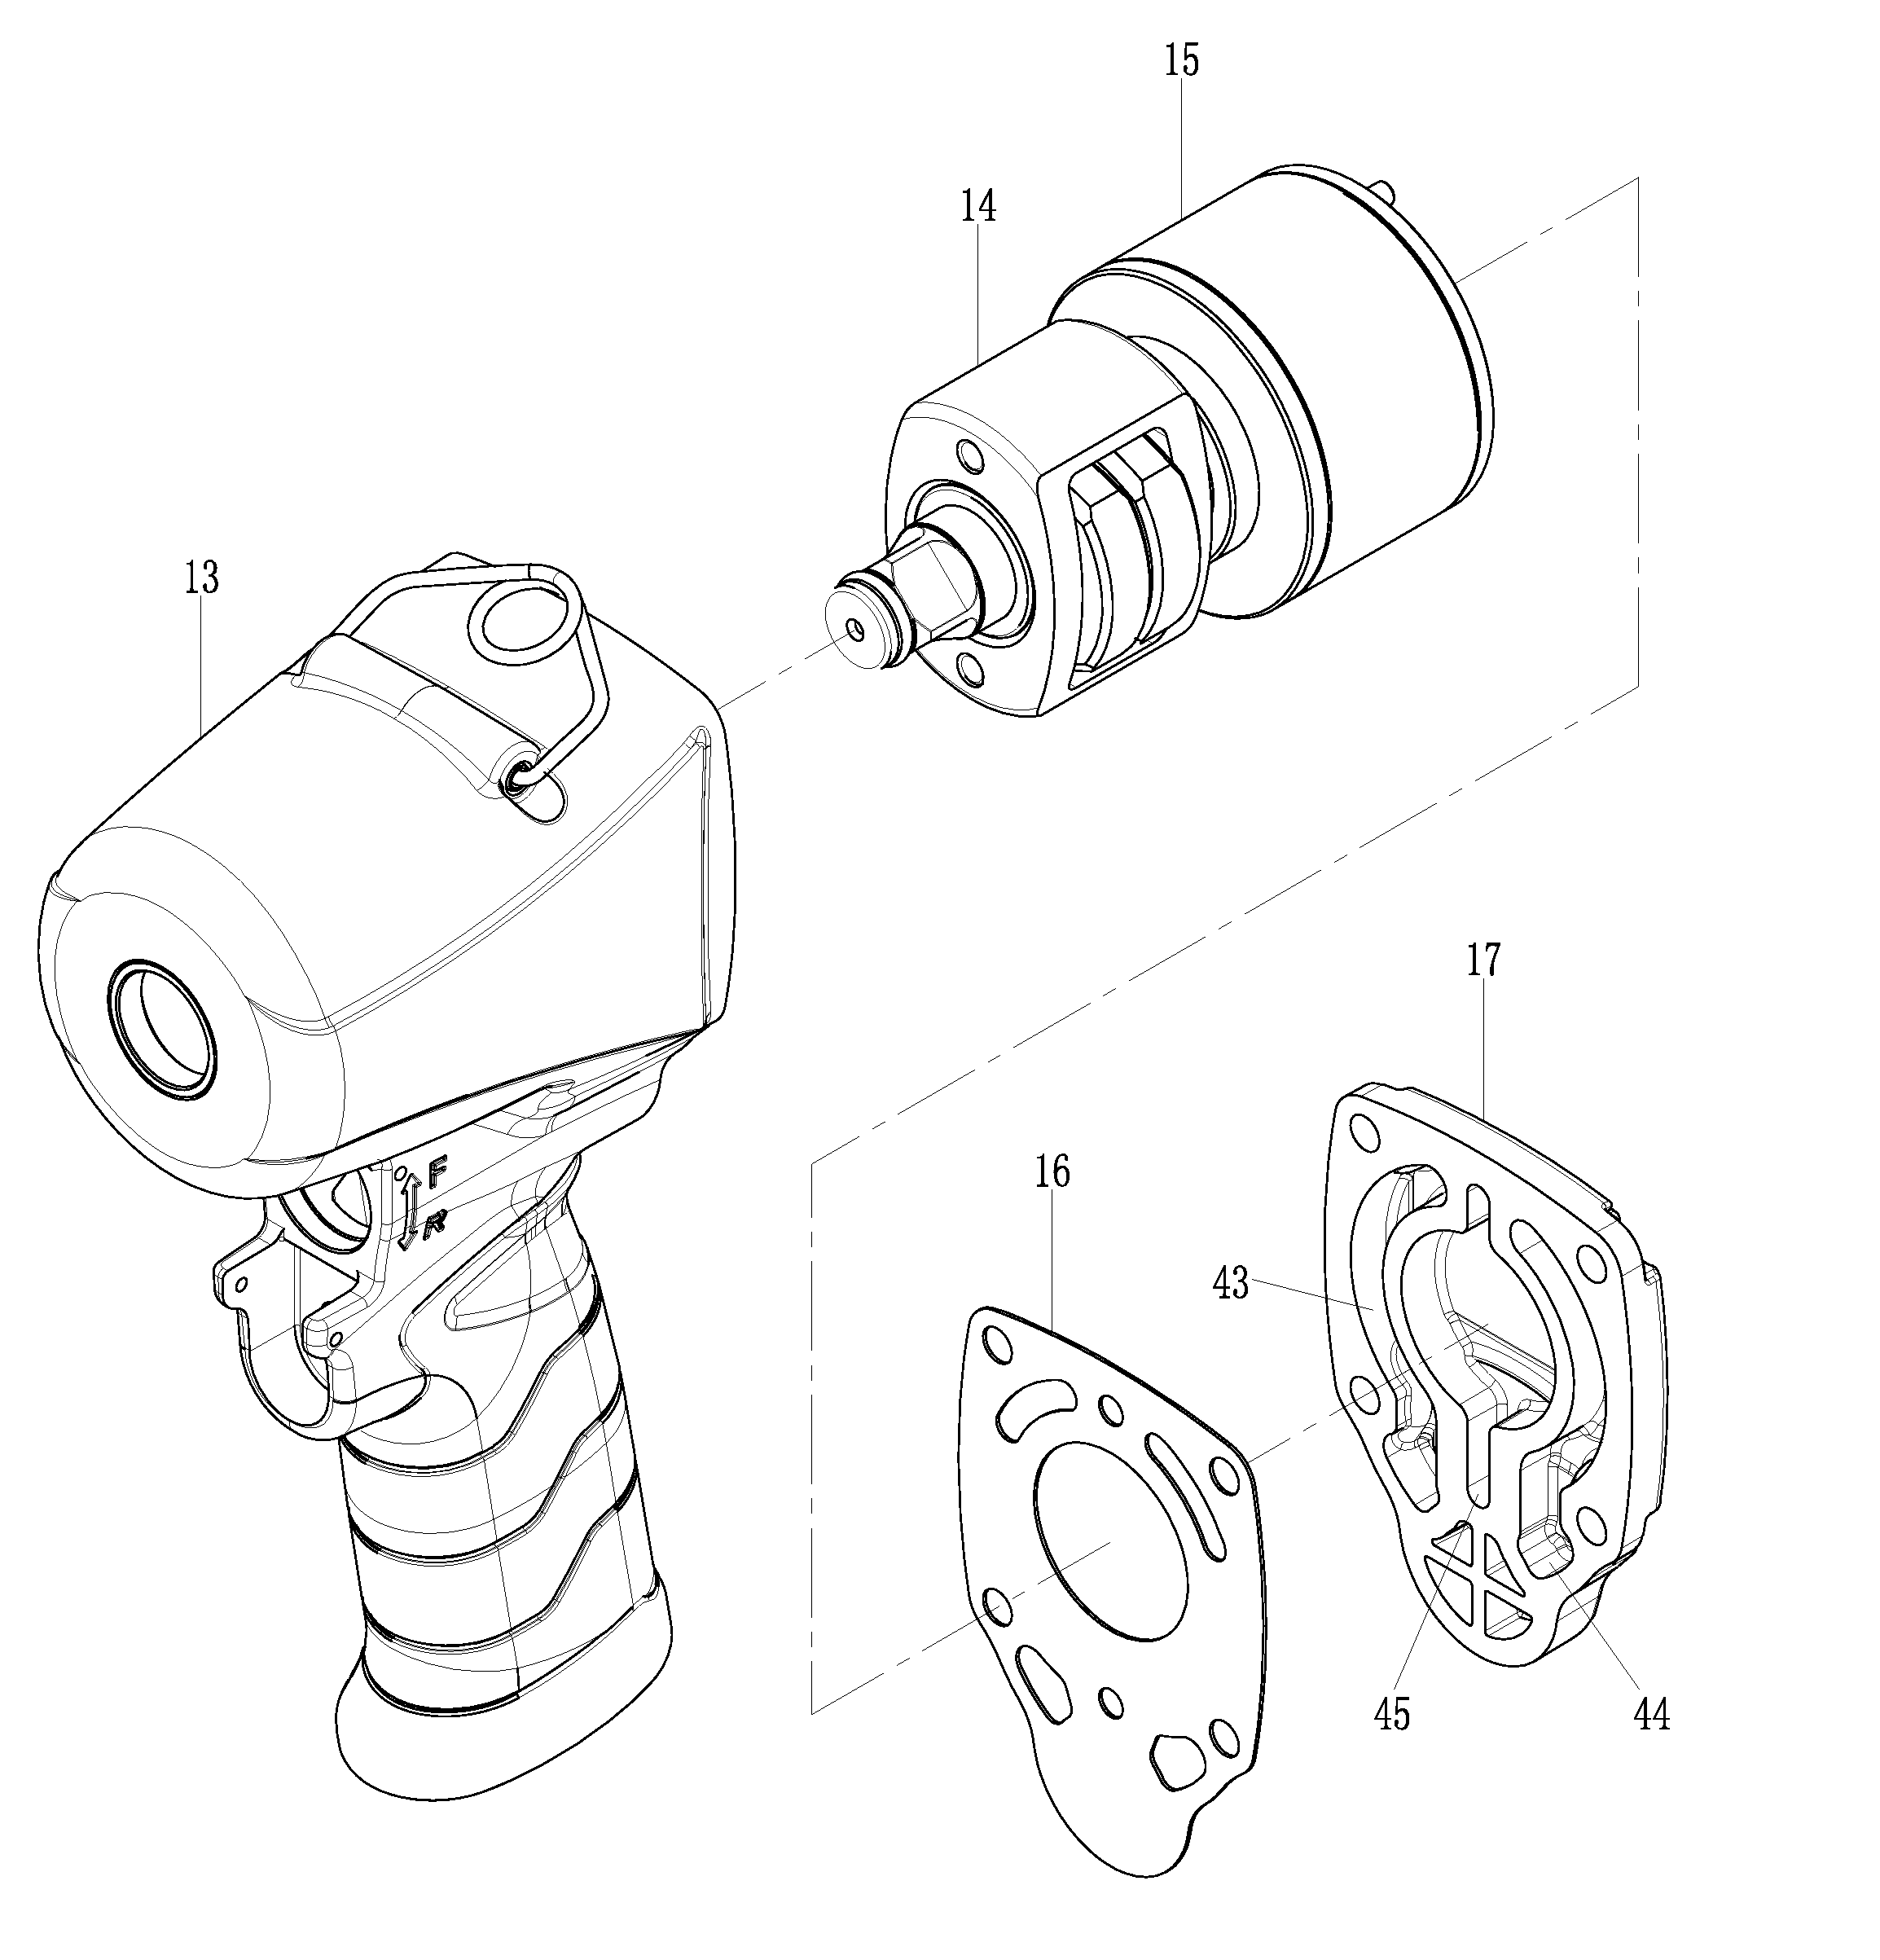 Pneumatic wrench with butterfly steering switching mechanism